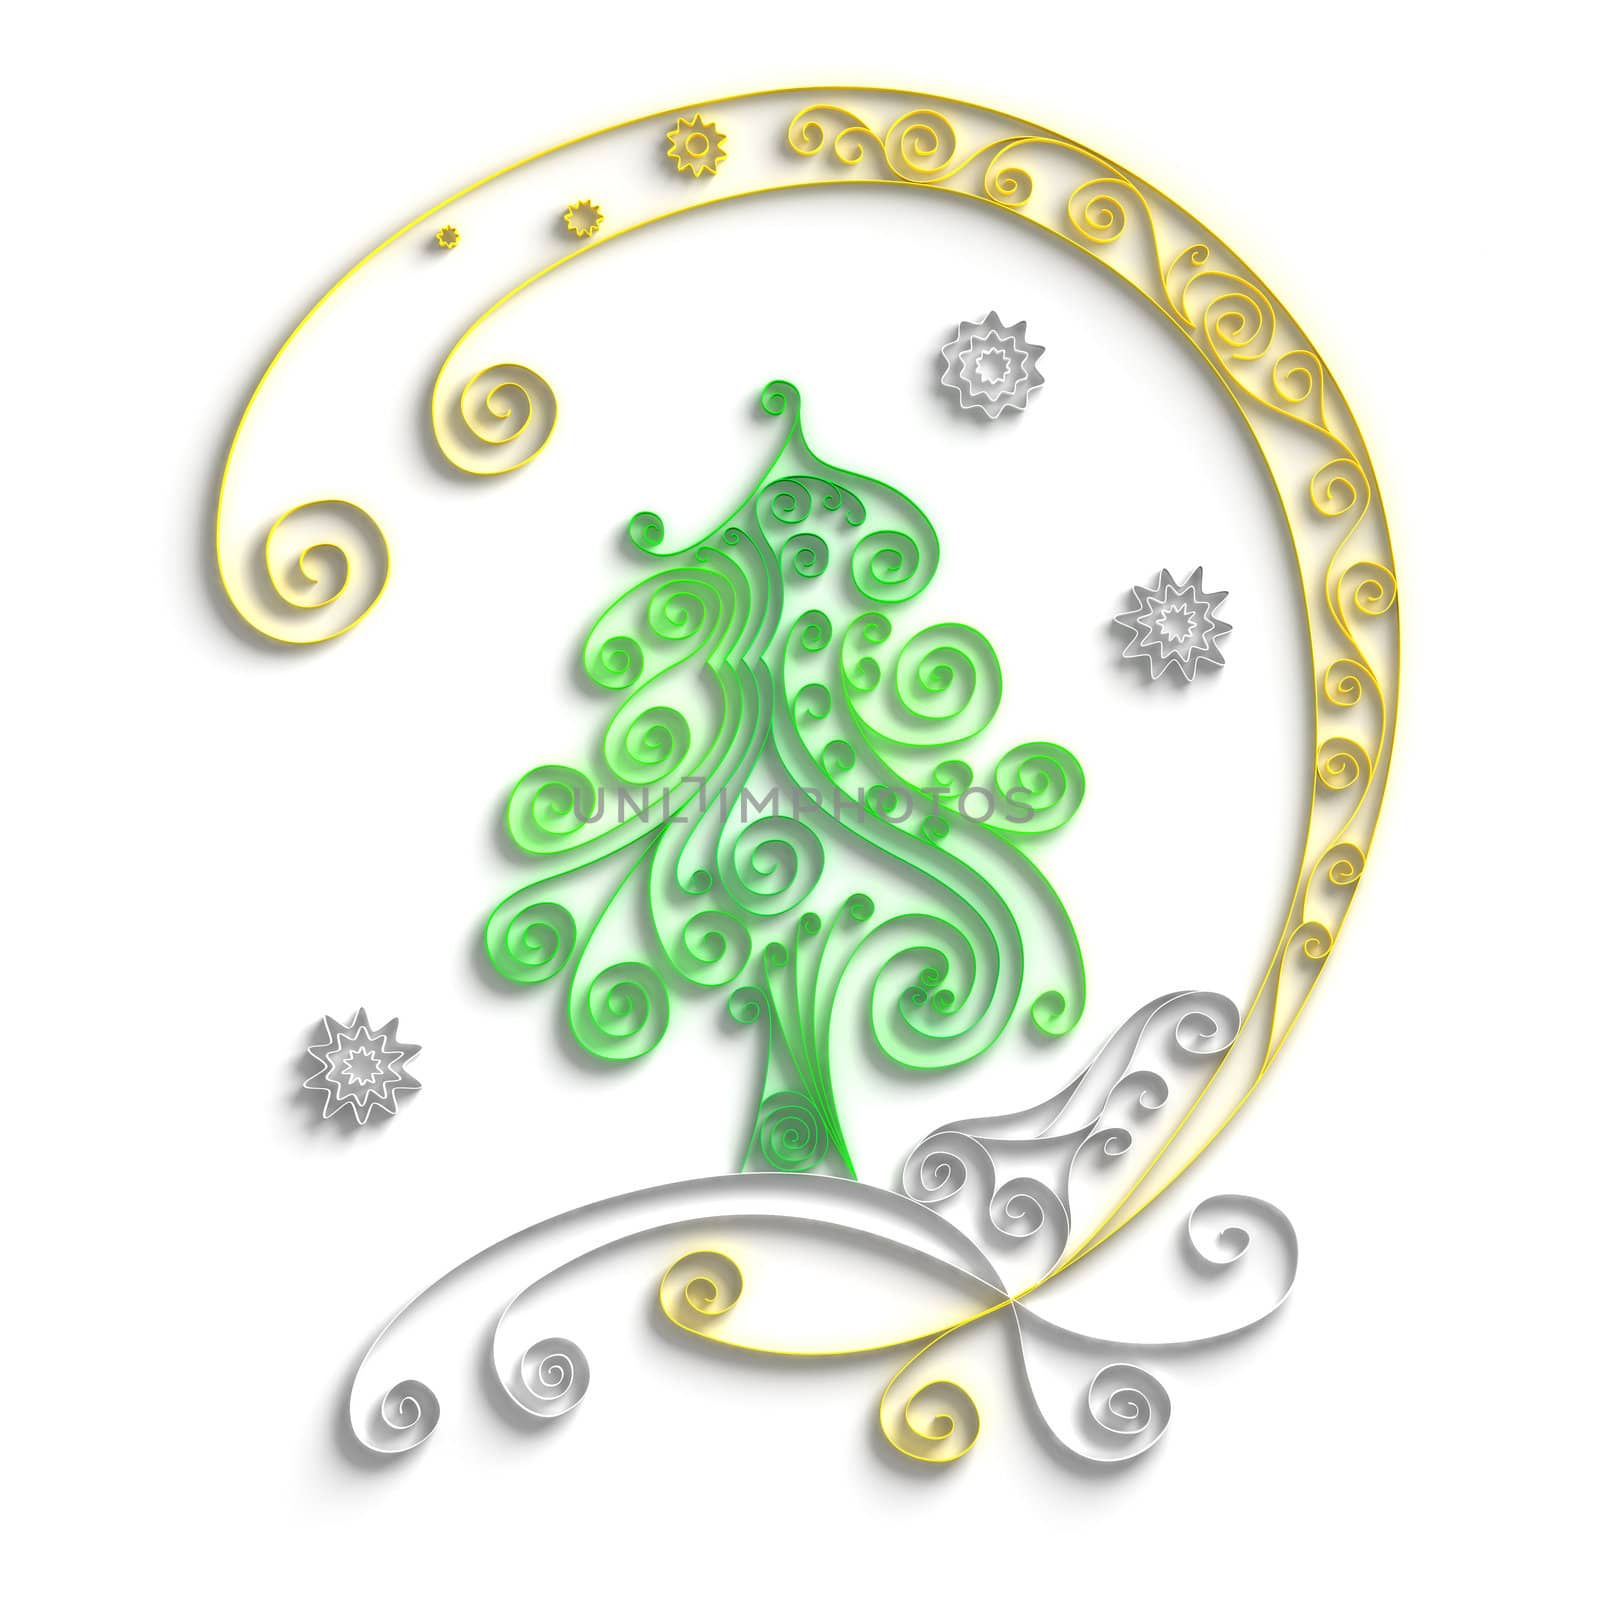 Ornamental design of christmas tree on white background, 3d quilling artwork